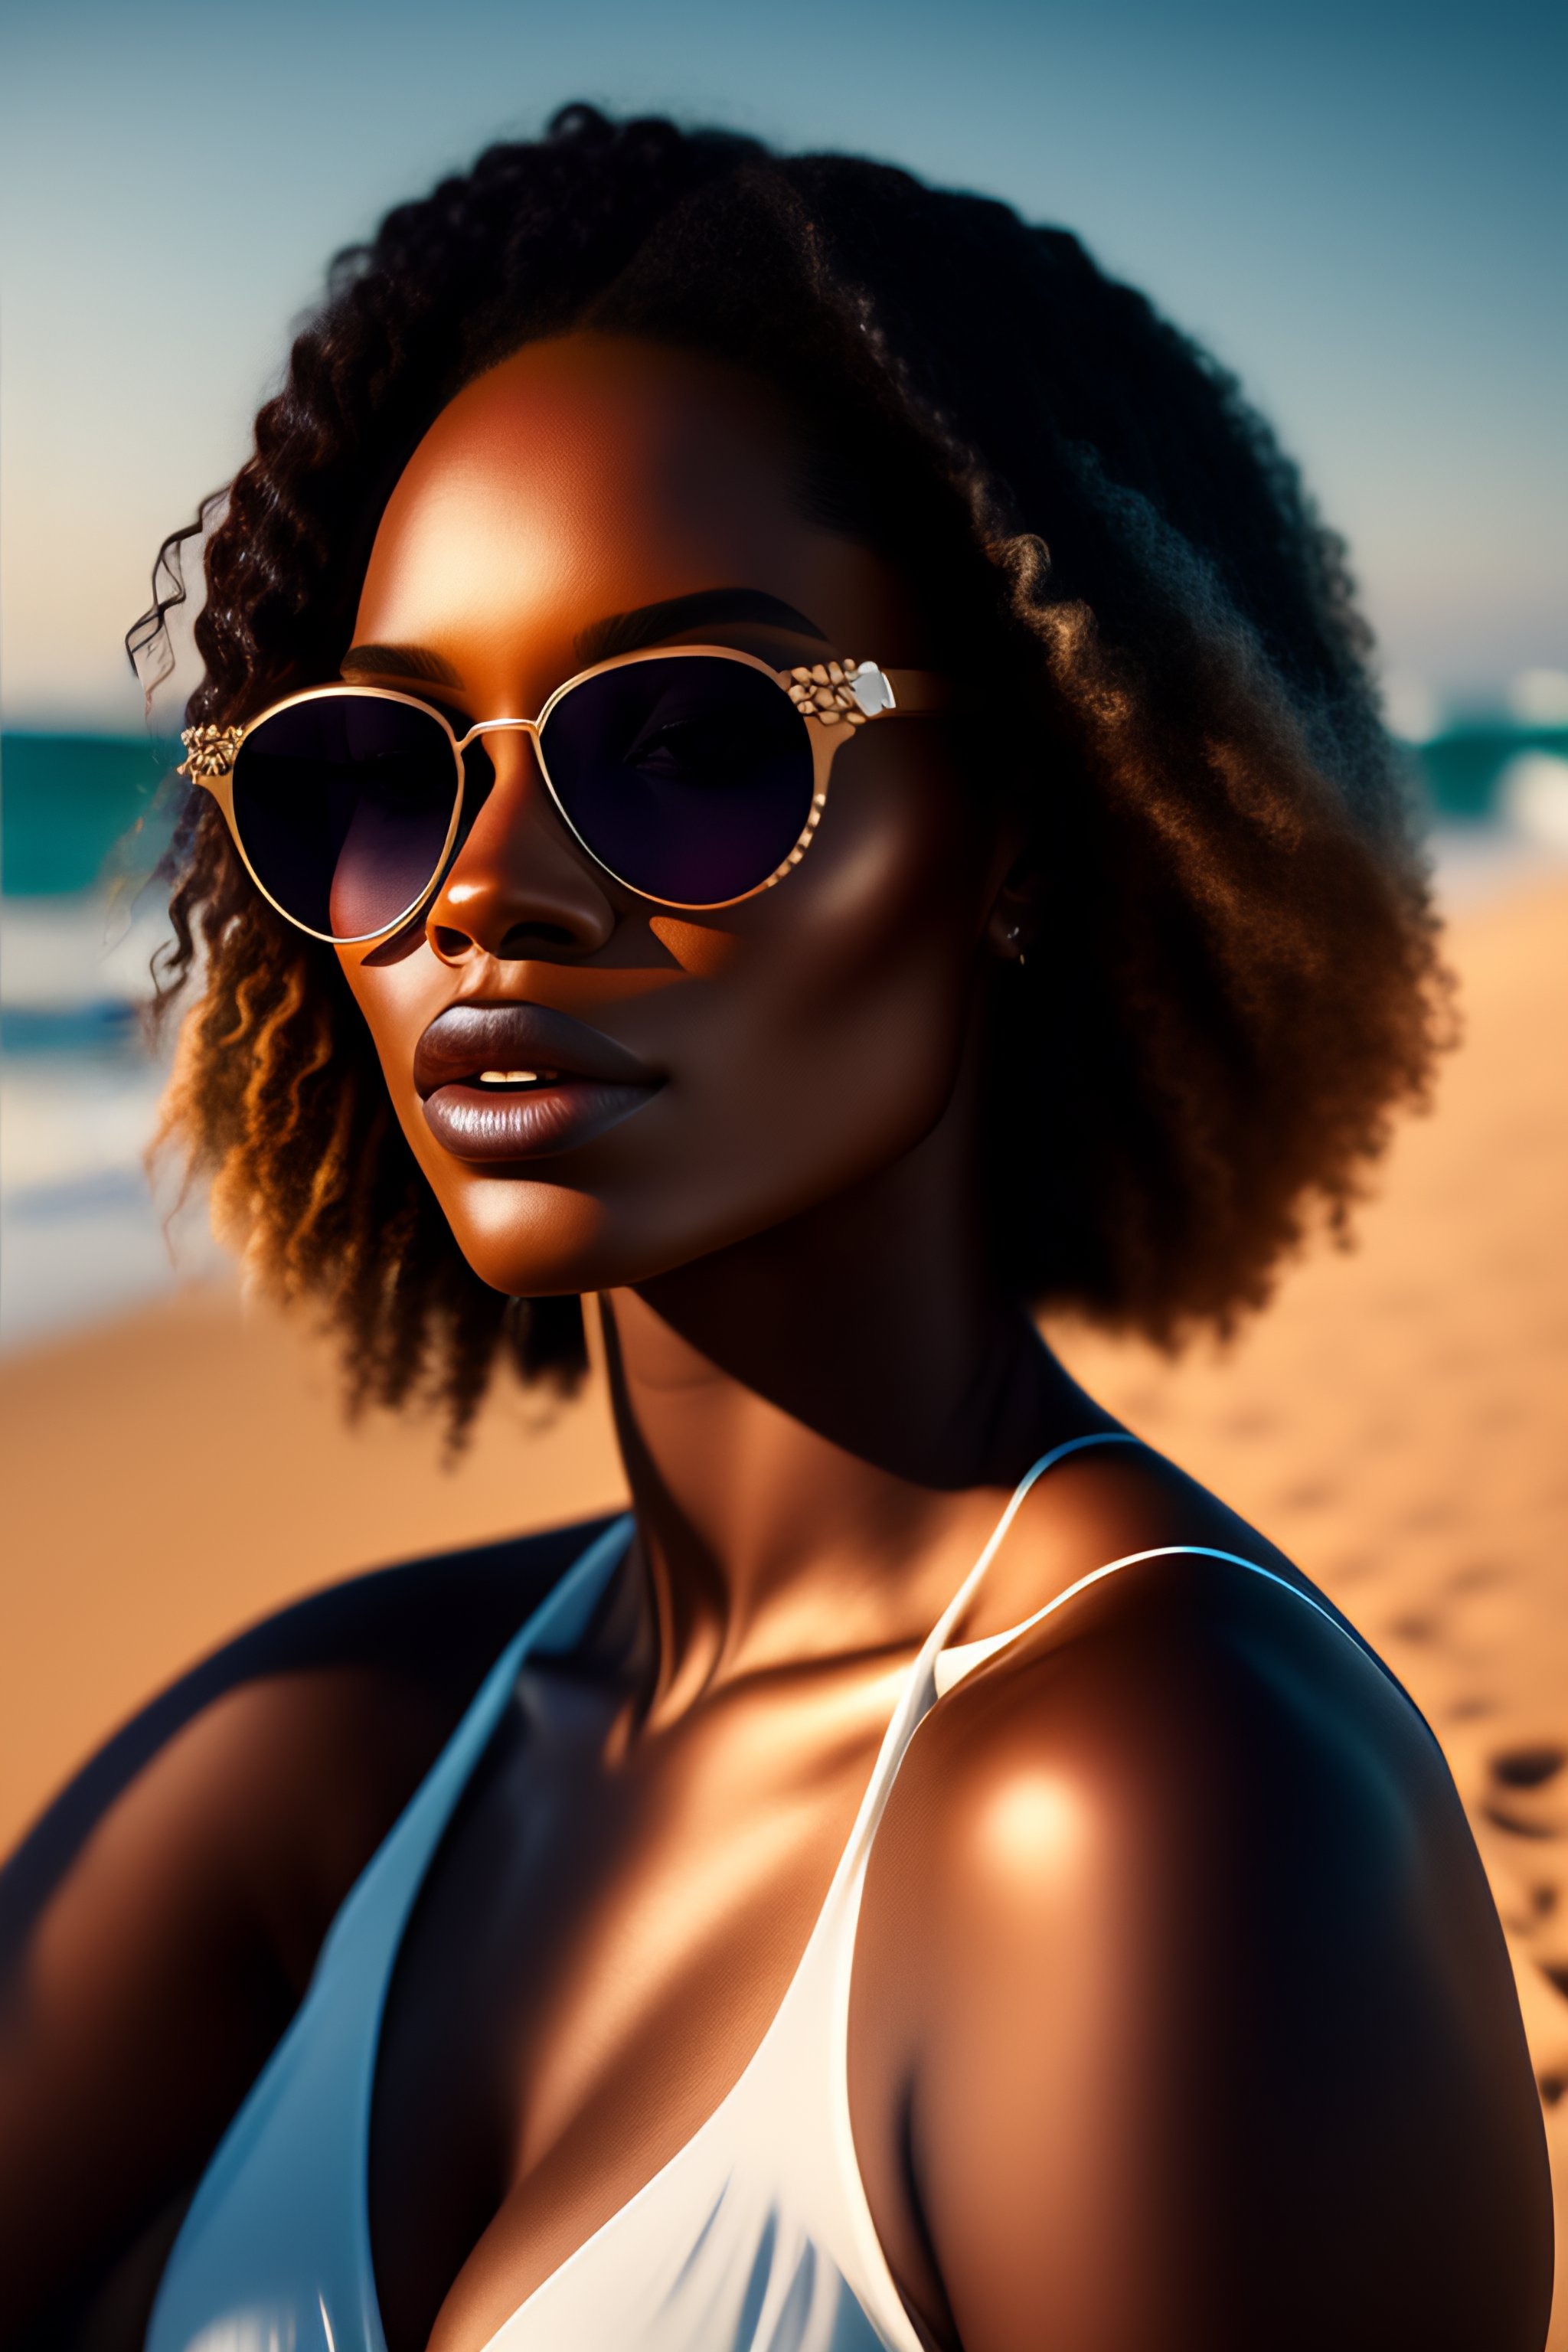 Lexica - Portrait of a beautiful black woman wearing sunglasses on the ...